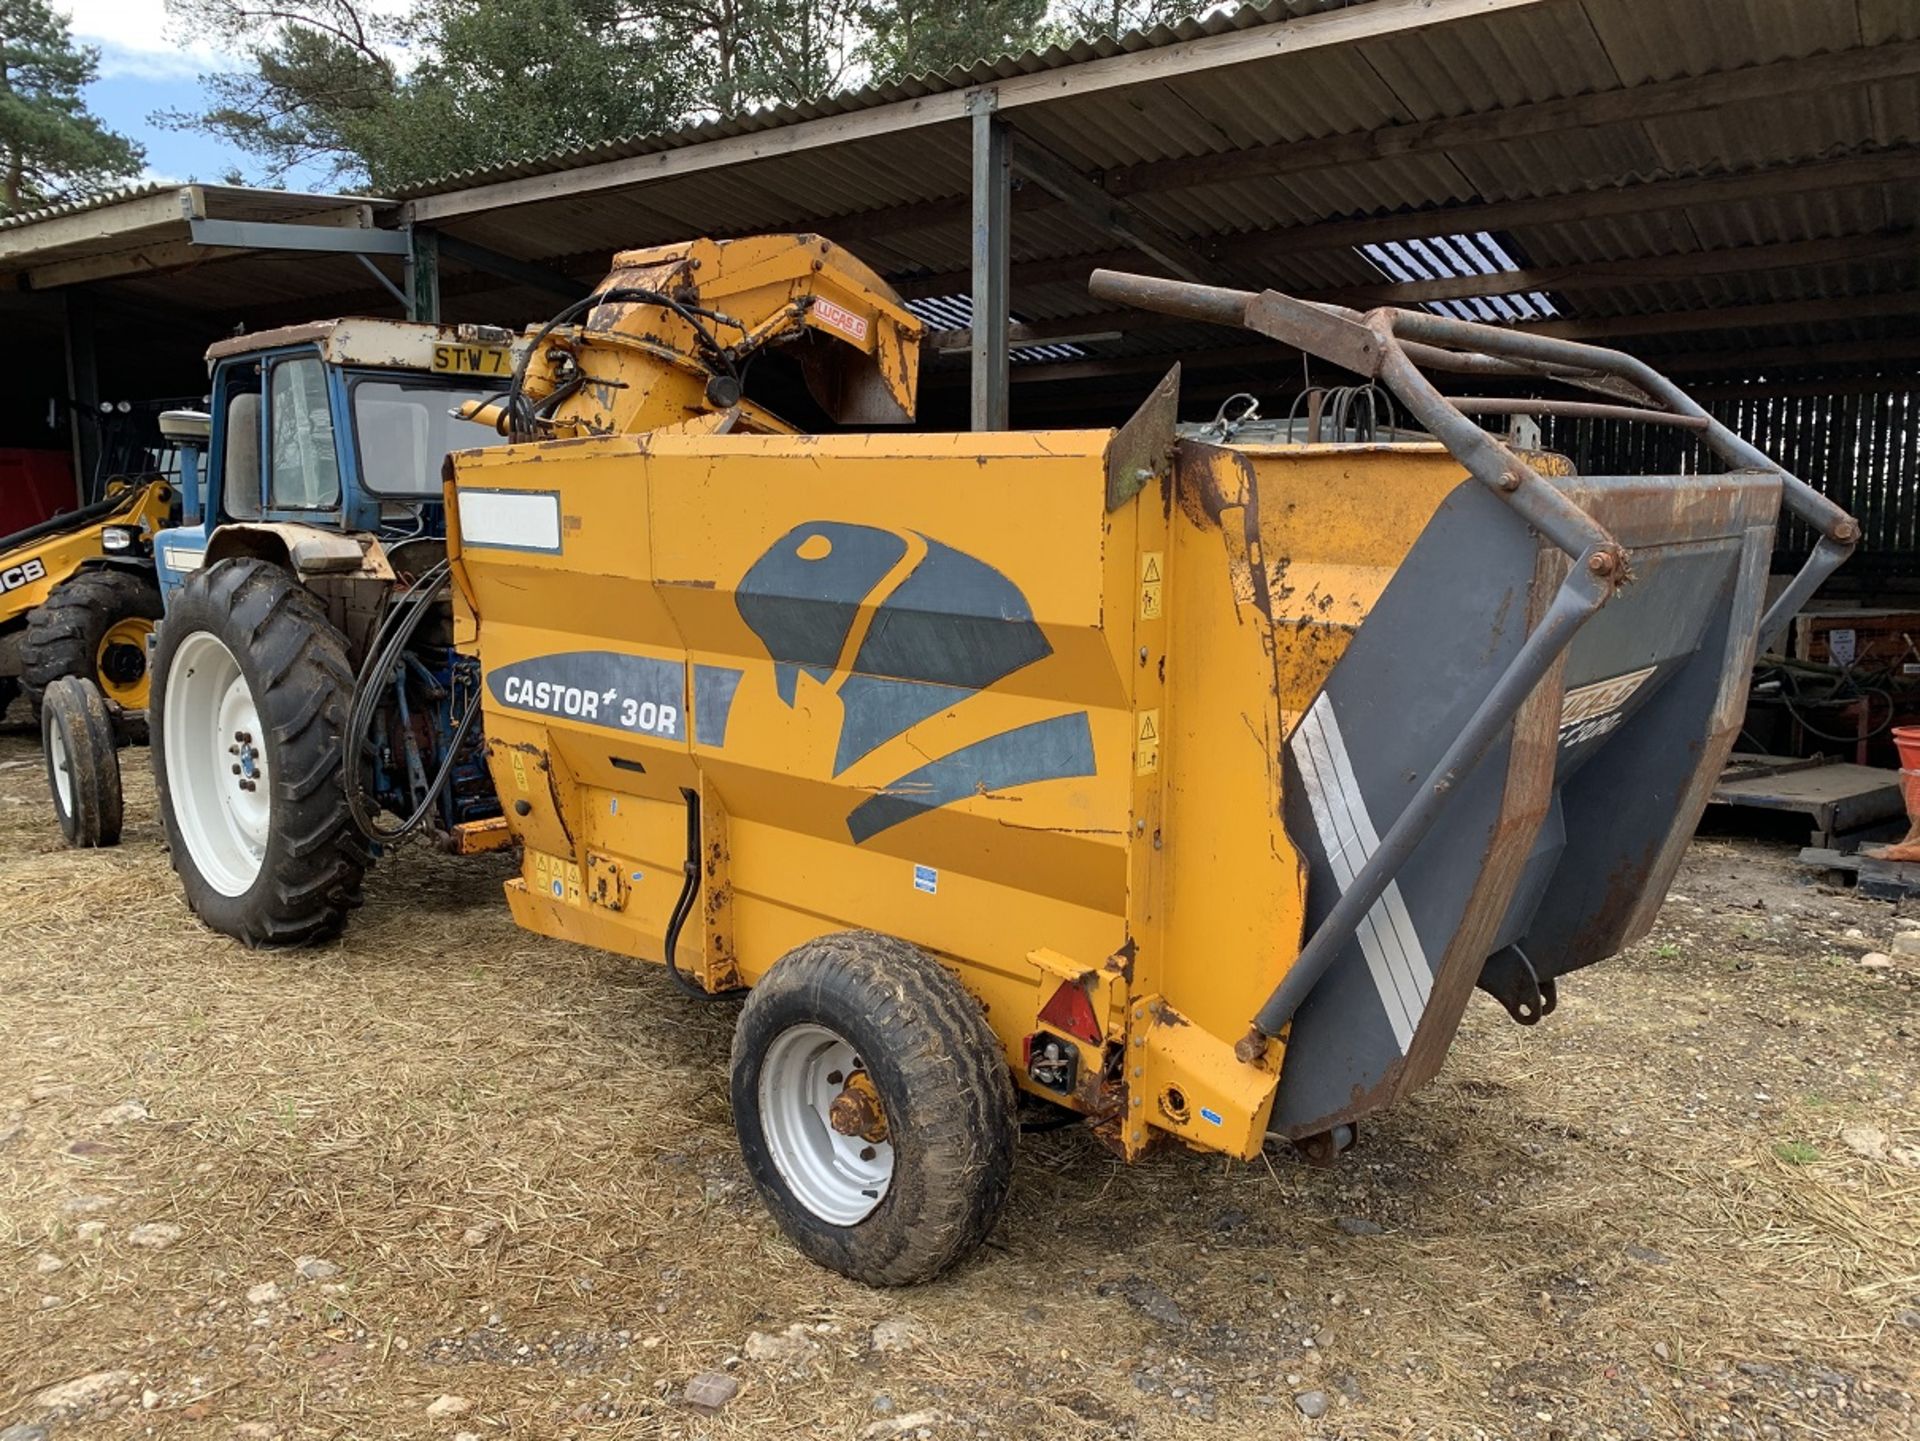 Lucas G Castor 30RUT Straw Chopper Blower Self Loading, Cable controlled Located near Beccles, - Image 3 of 5